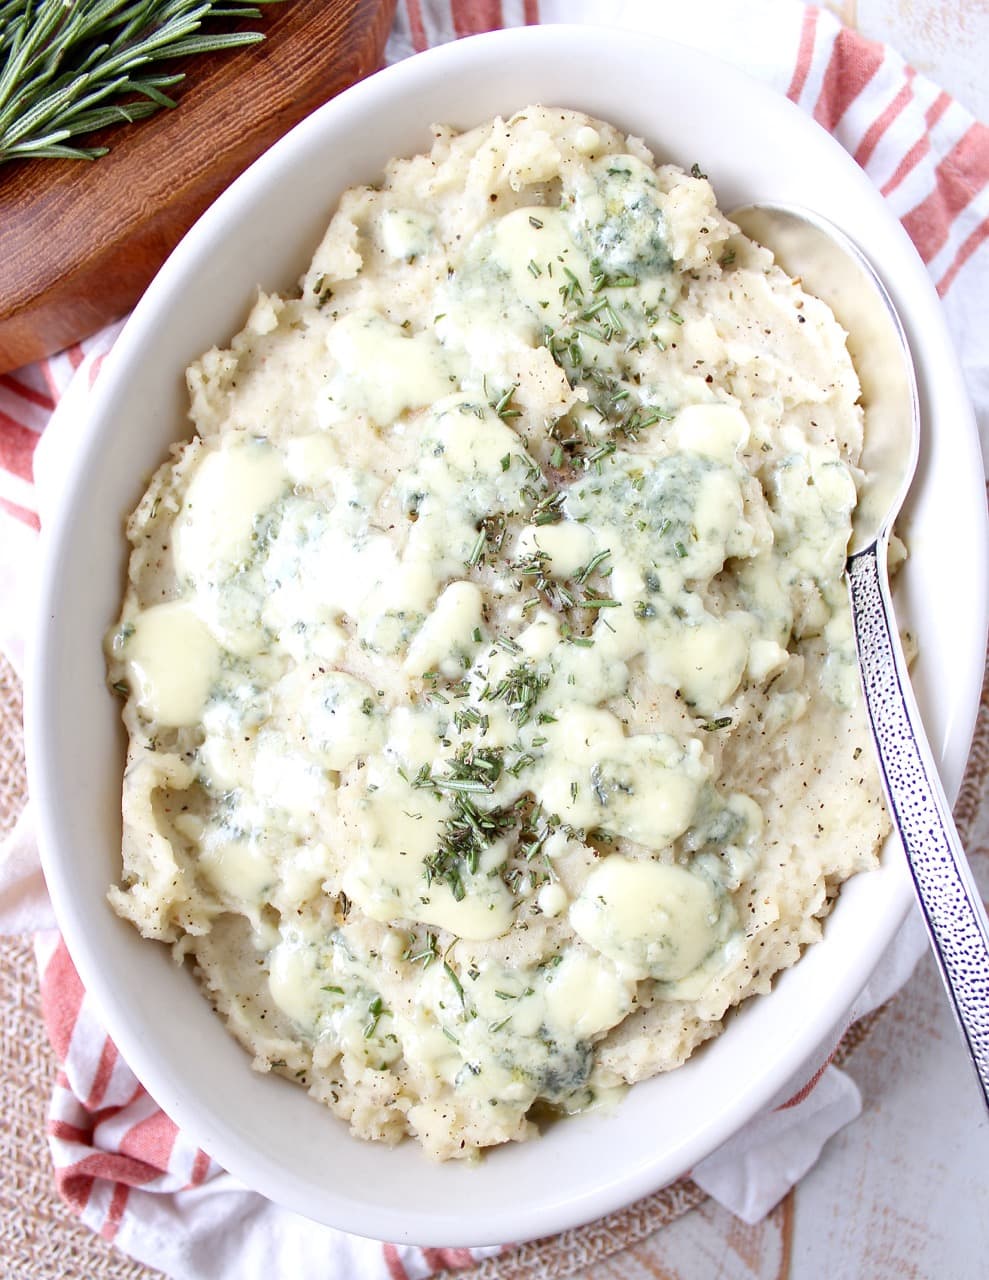 mashed potatoes in bowl with serving spoon